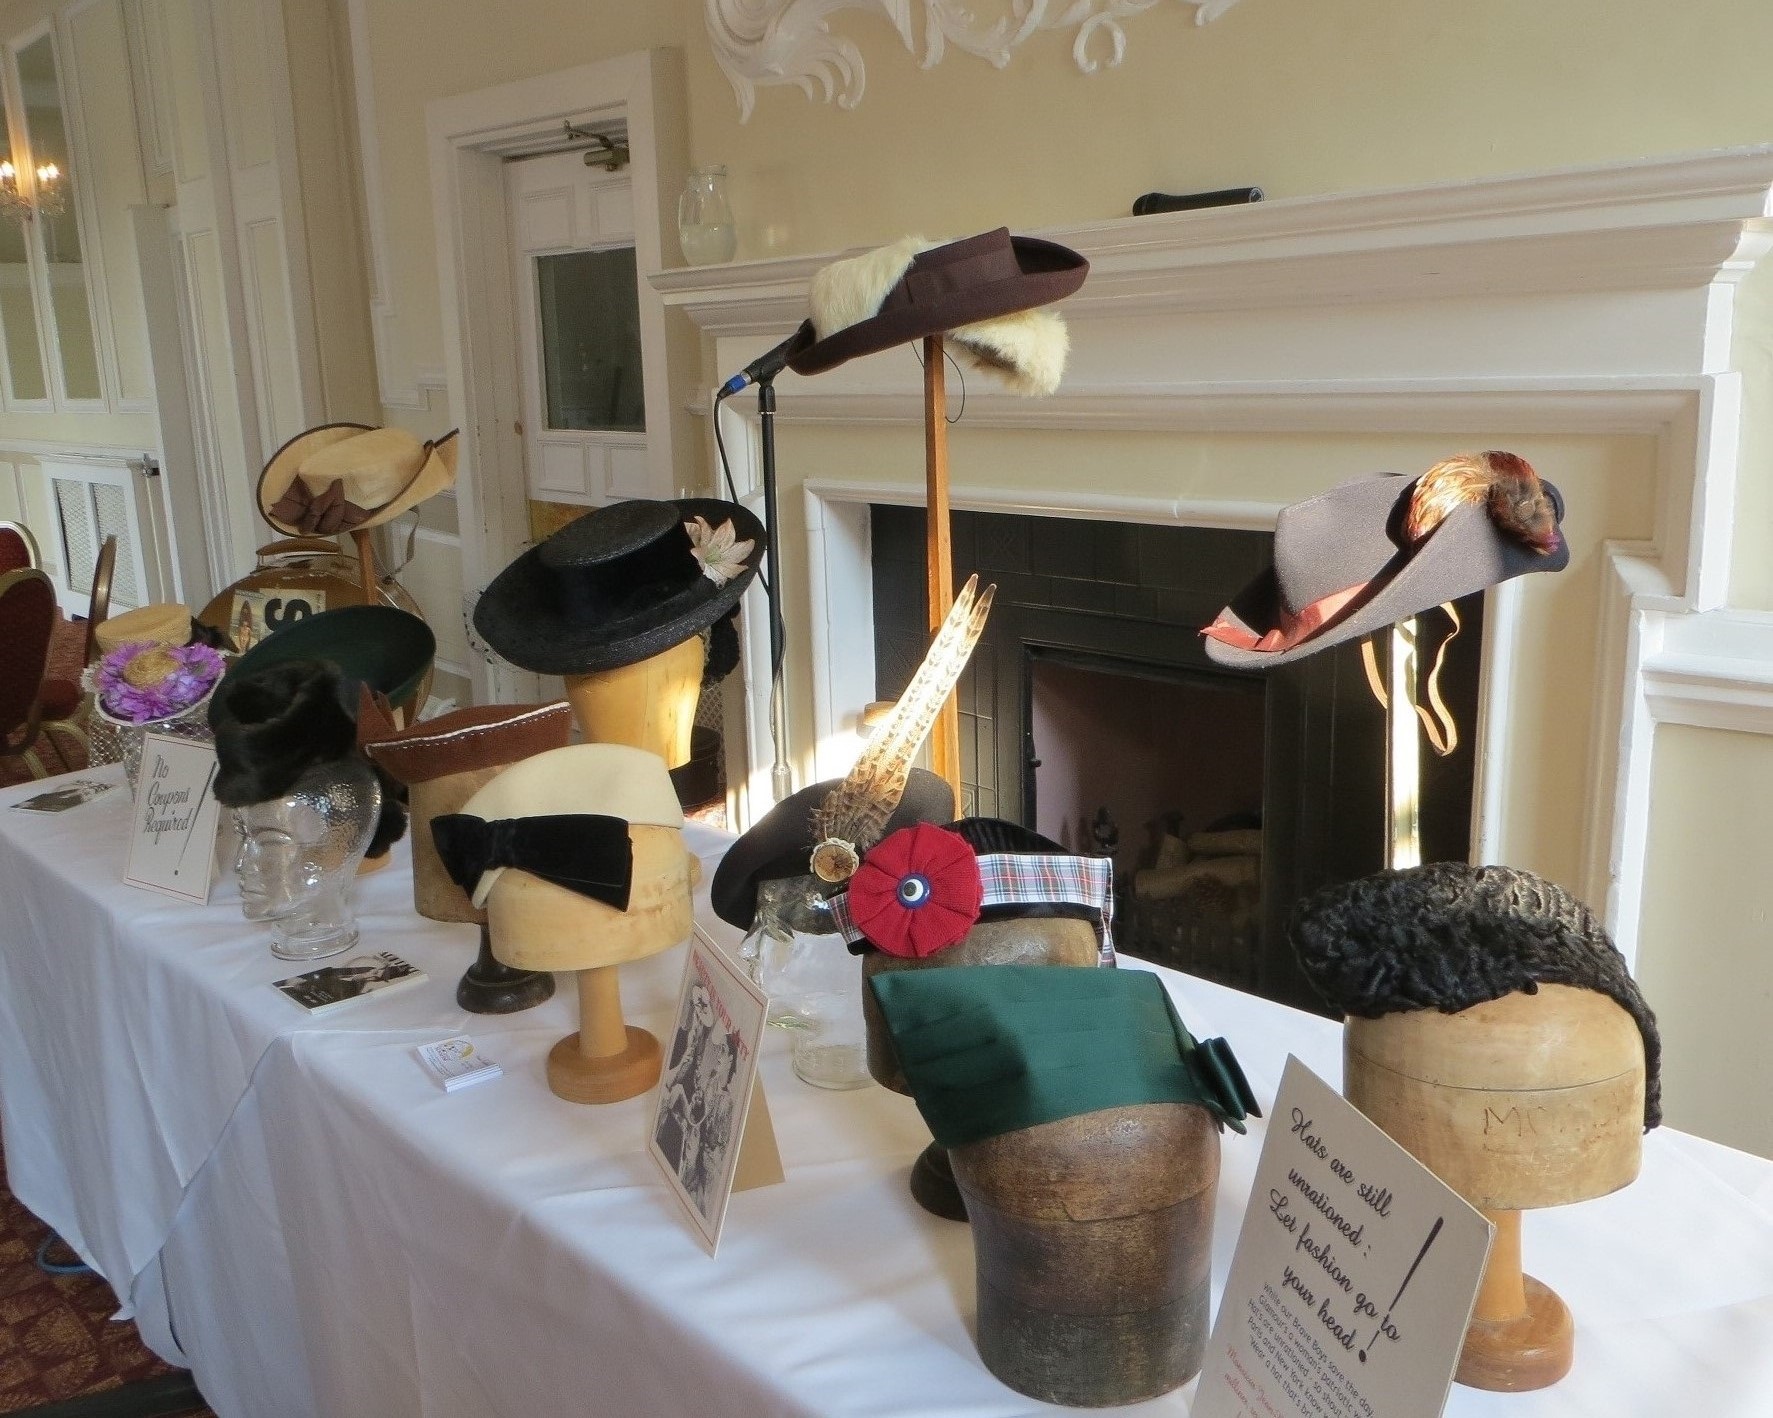 1940s and 1950s hats shown at the after dinner talk